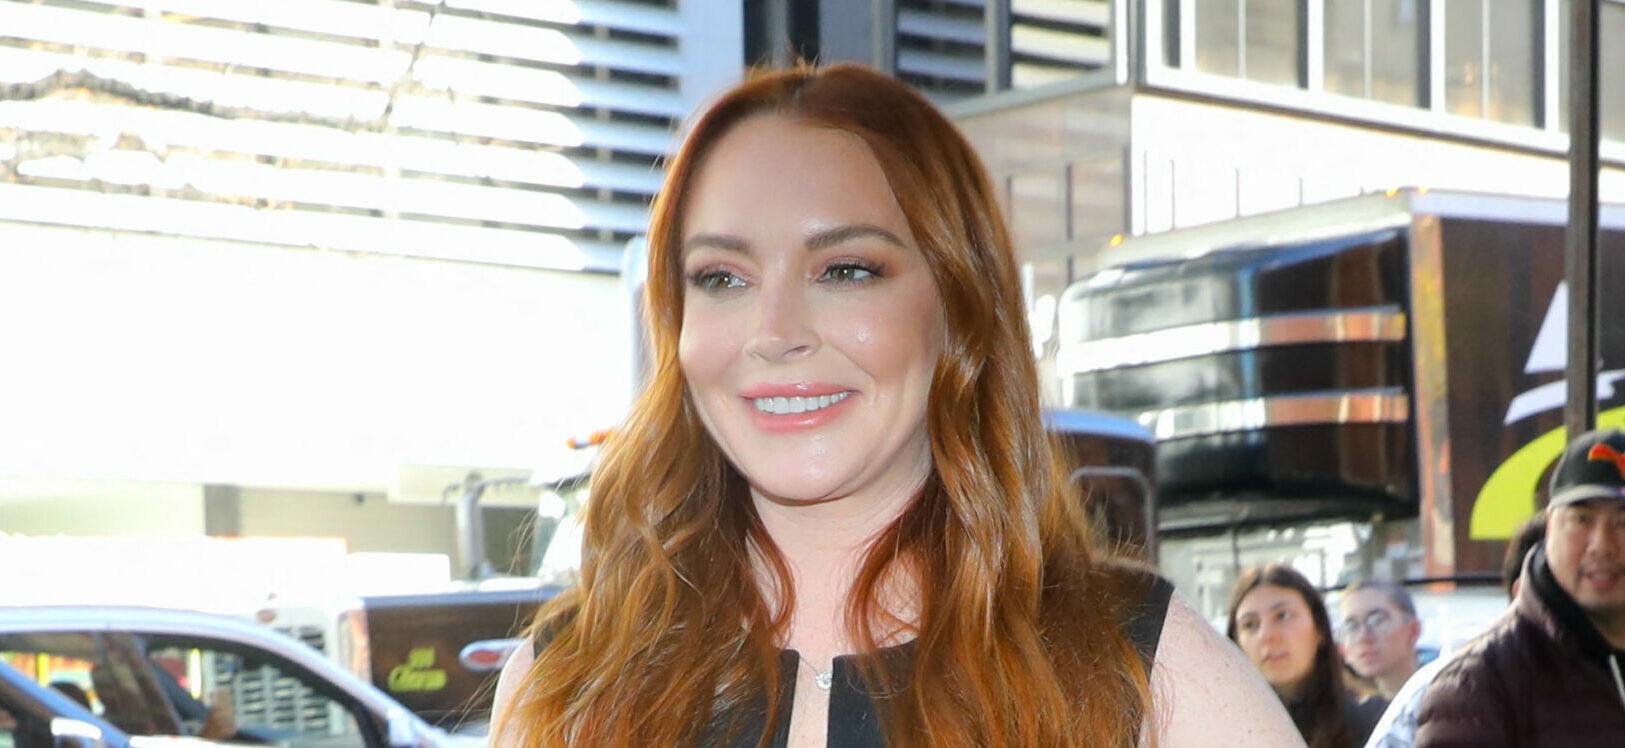 Lindsay Lohan’s Parents Are ‘Over The Moon’ About Incoming Grandchild